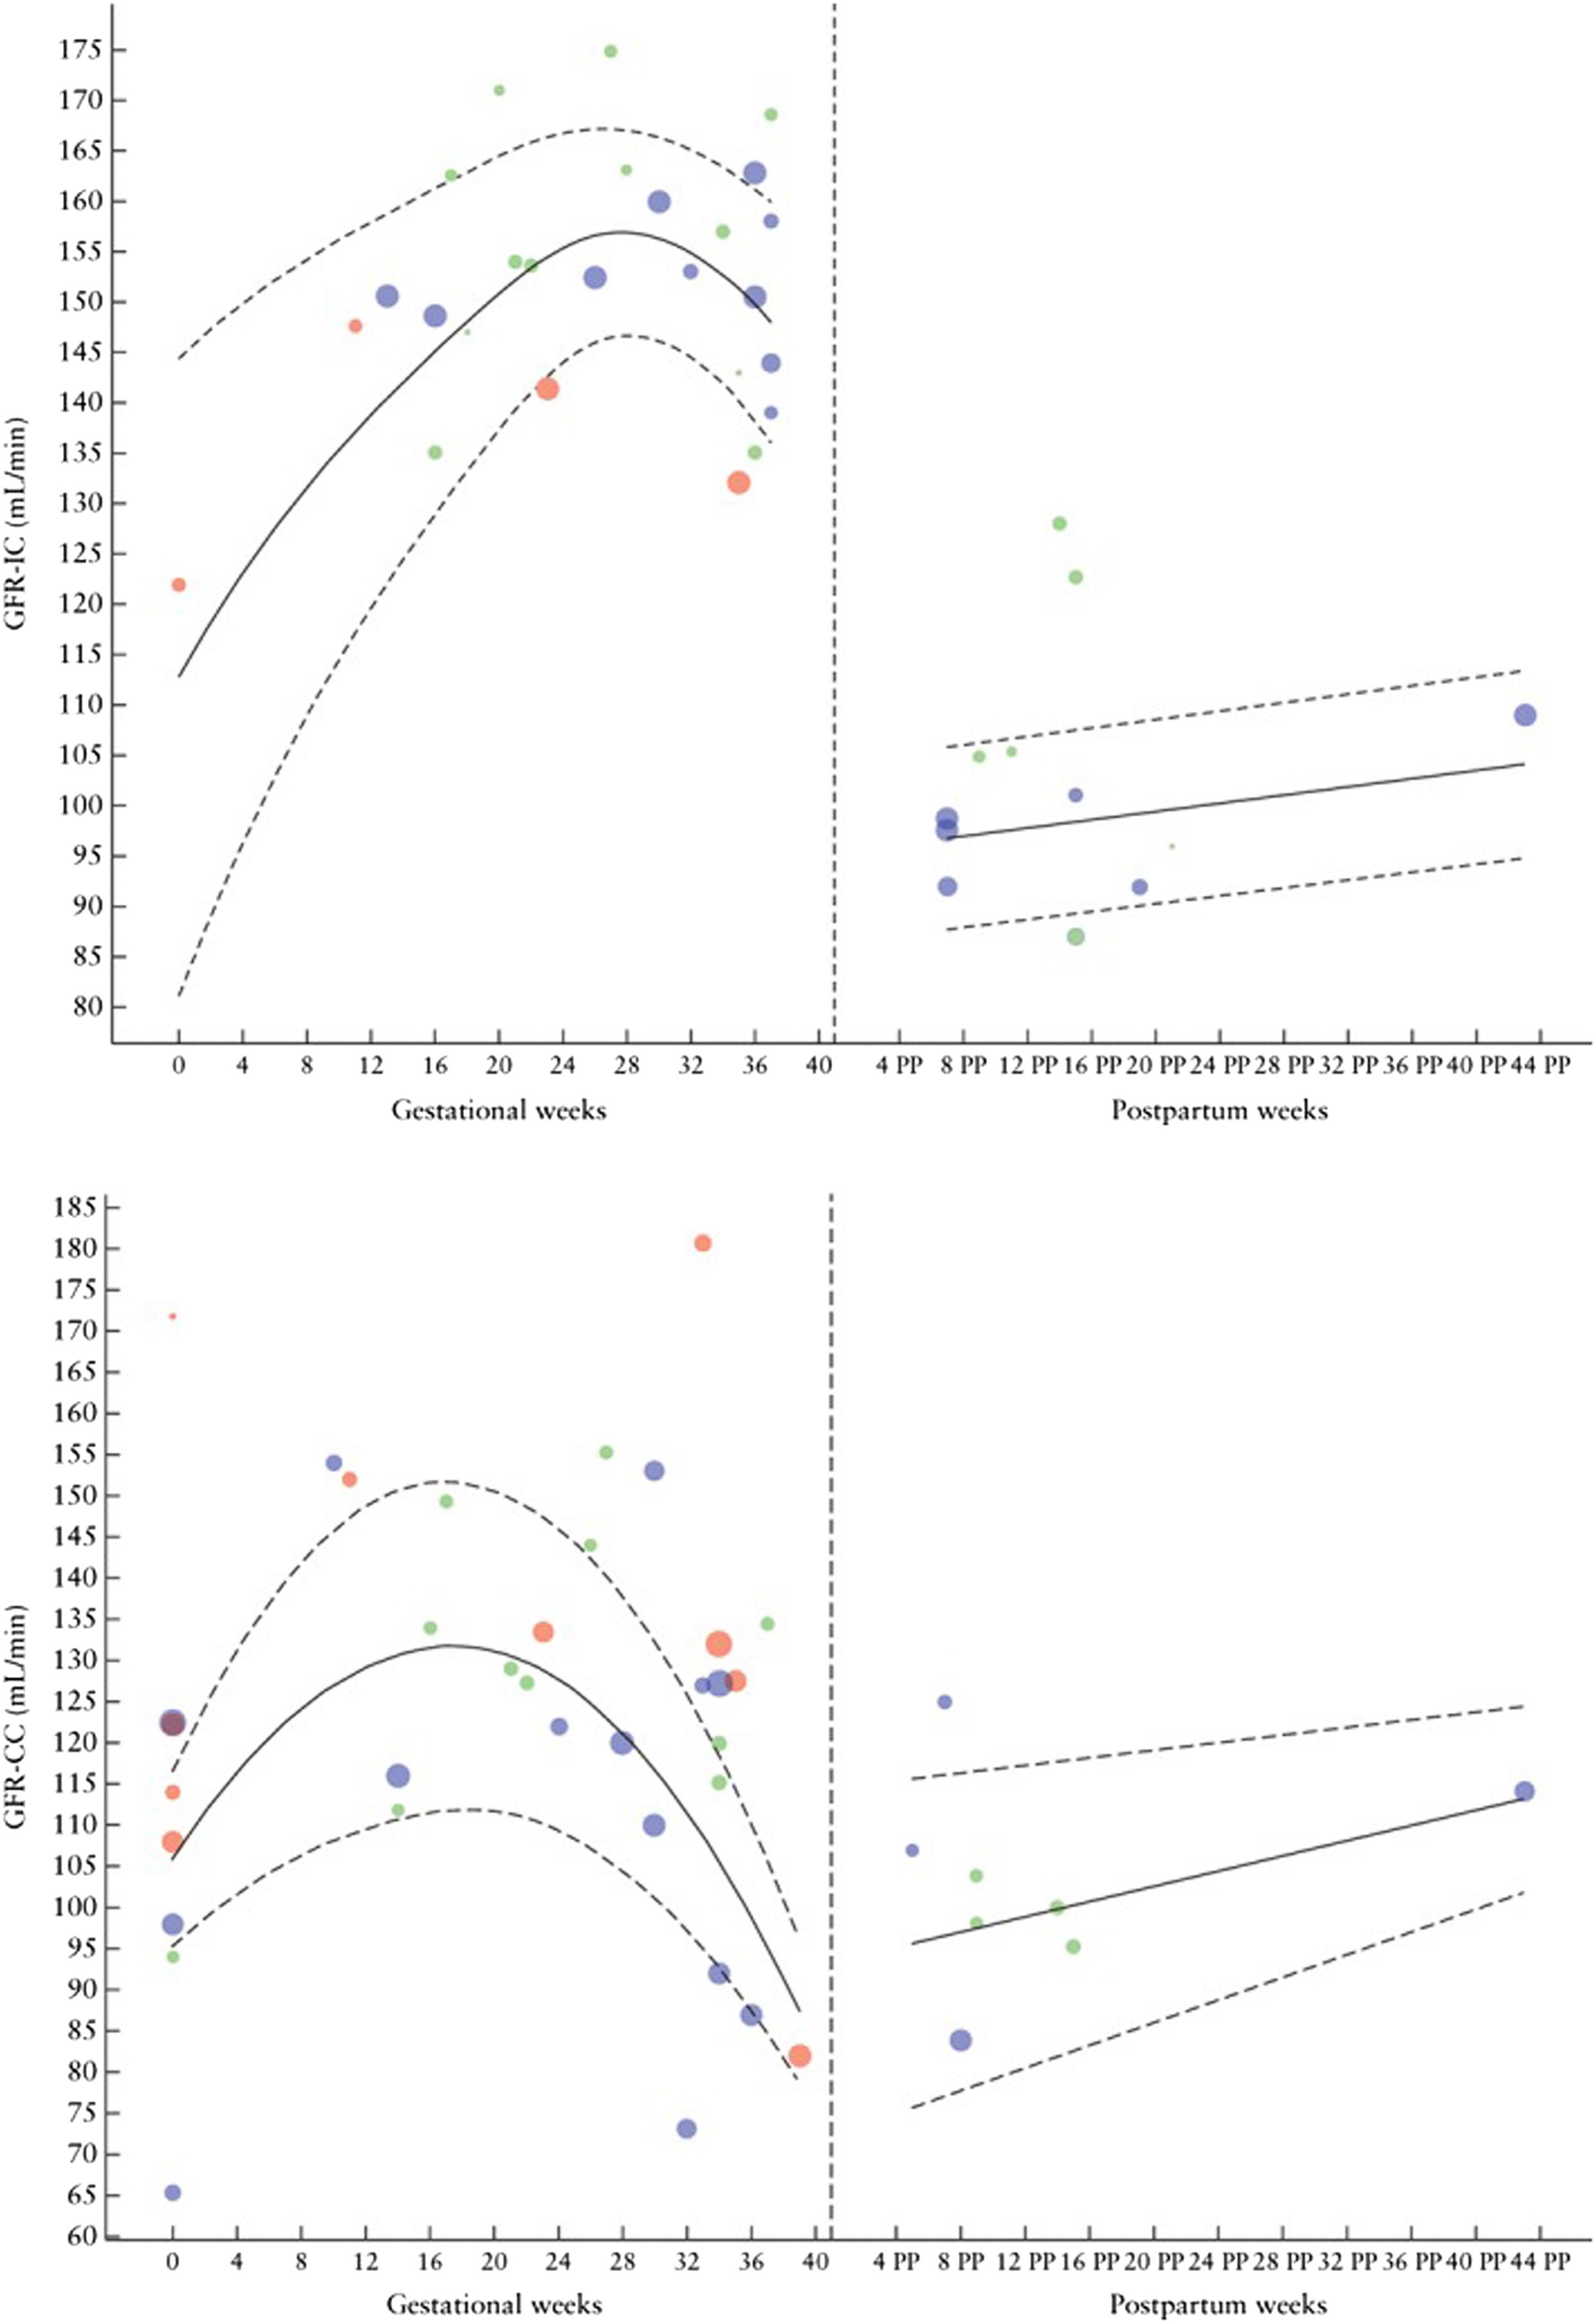 Figure 14.3, Glomerular filtration rate (GFR), measured by inulin clearance (top) and 24-h endogenous creatinine clearance (bottom), during and after physiological pregnancy. Circle size indicates sample size of point estimate. Color refers to quality assigned to study: red, low quality; green, moderate quality; blue, high quality. Curve fit is weighted by inverse variance and plotted with 5th and 95th percentiles ( dashed lines ); 50th percentile is represented by solid line . Gestational weeks “0”, nonpregnant; PP , postpartum.